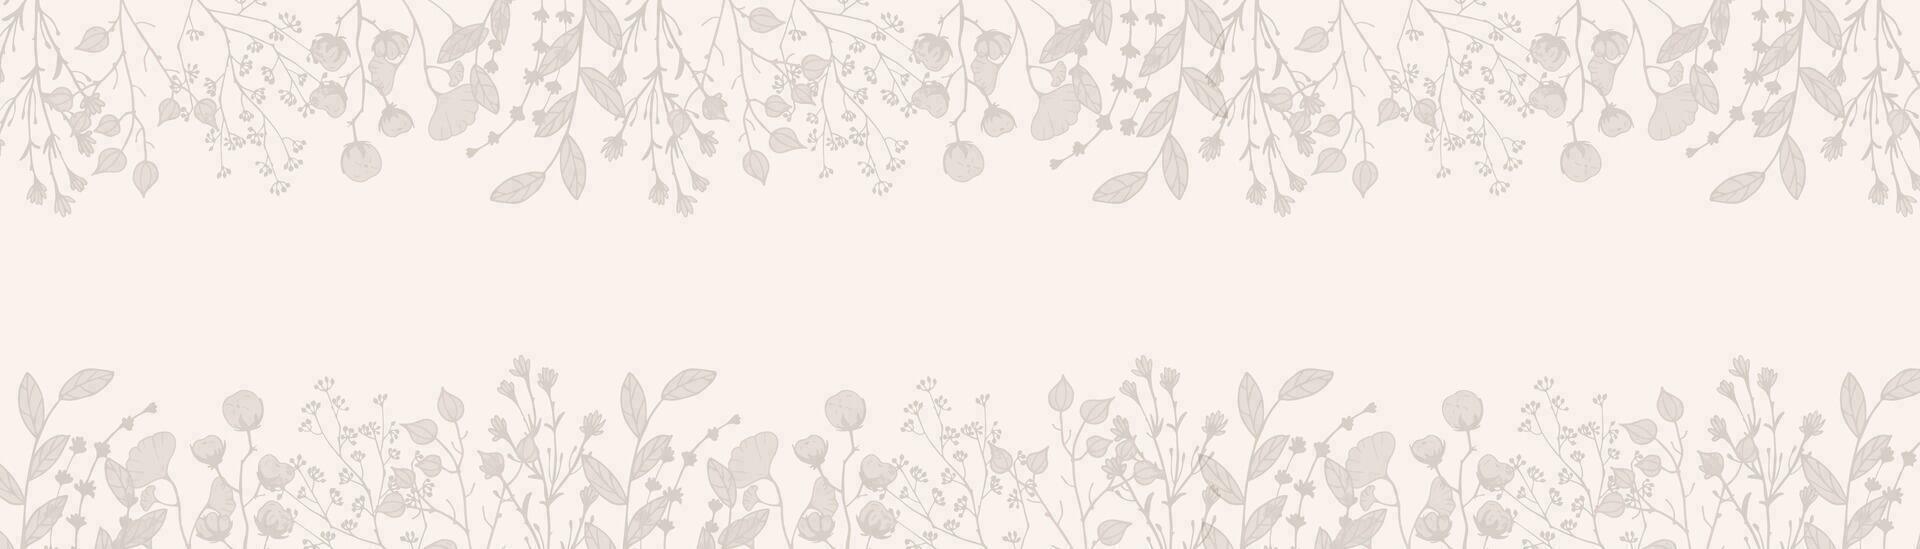 Horizontal Border Dry Herbs. Natural medicine. Vector banner with branches twigs cotton in beige. Design frame for decoration of medical articles and websites, print, postcards, covers, posters.